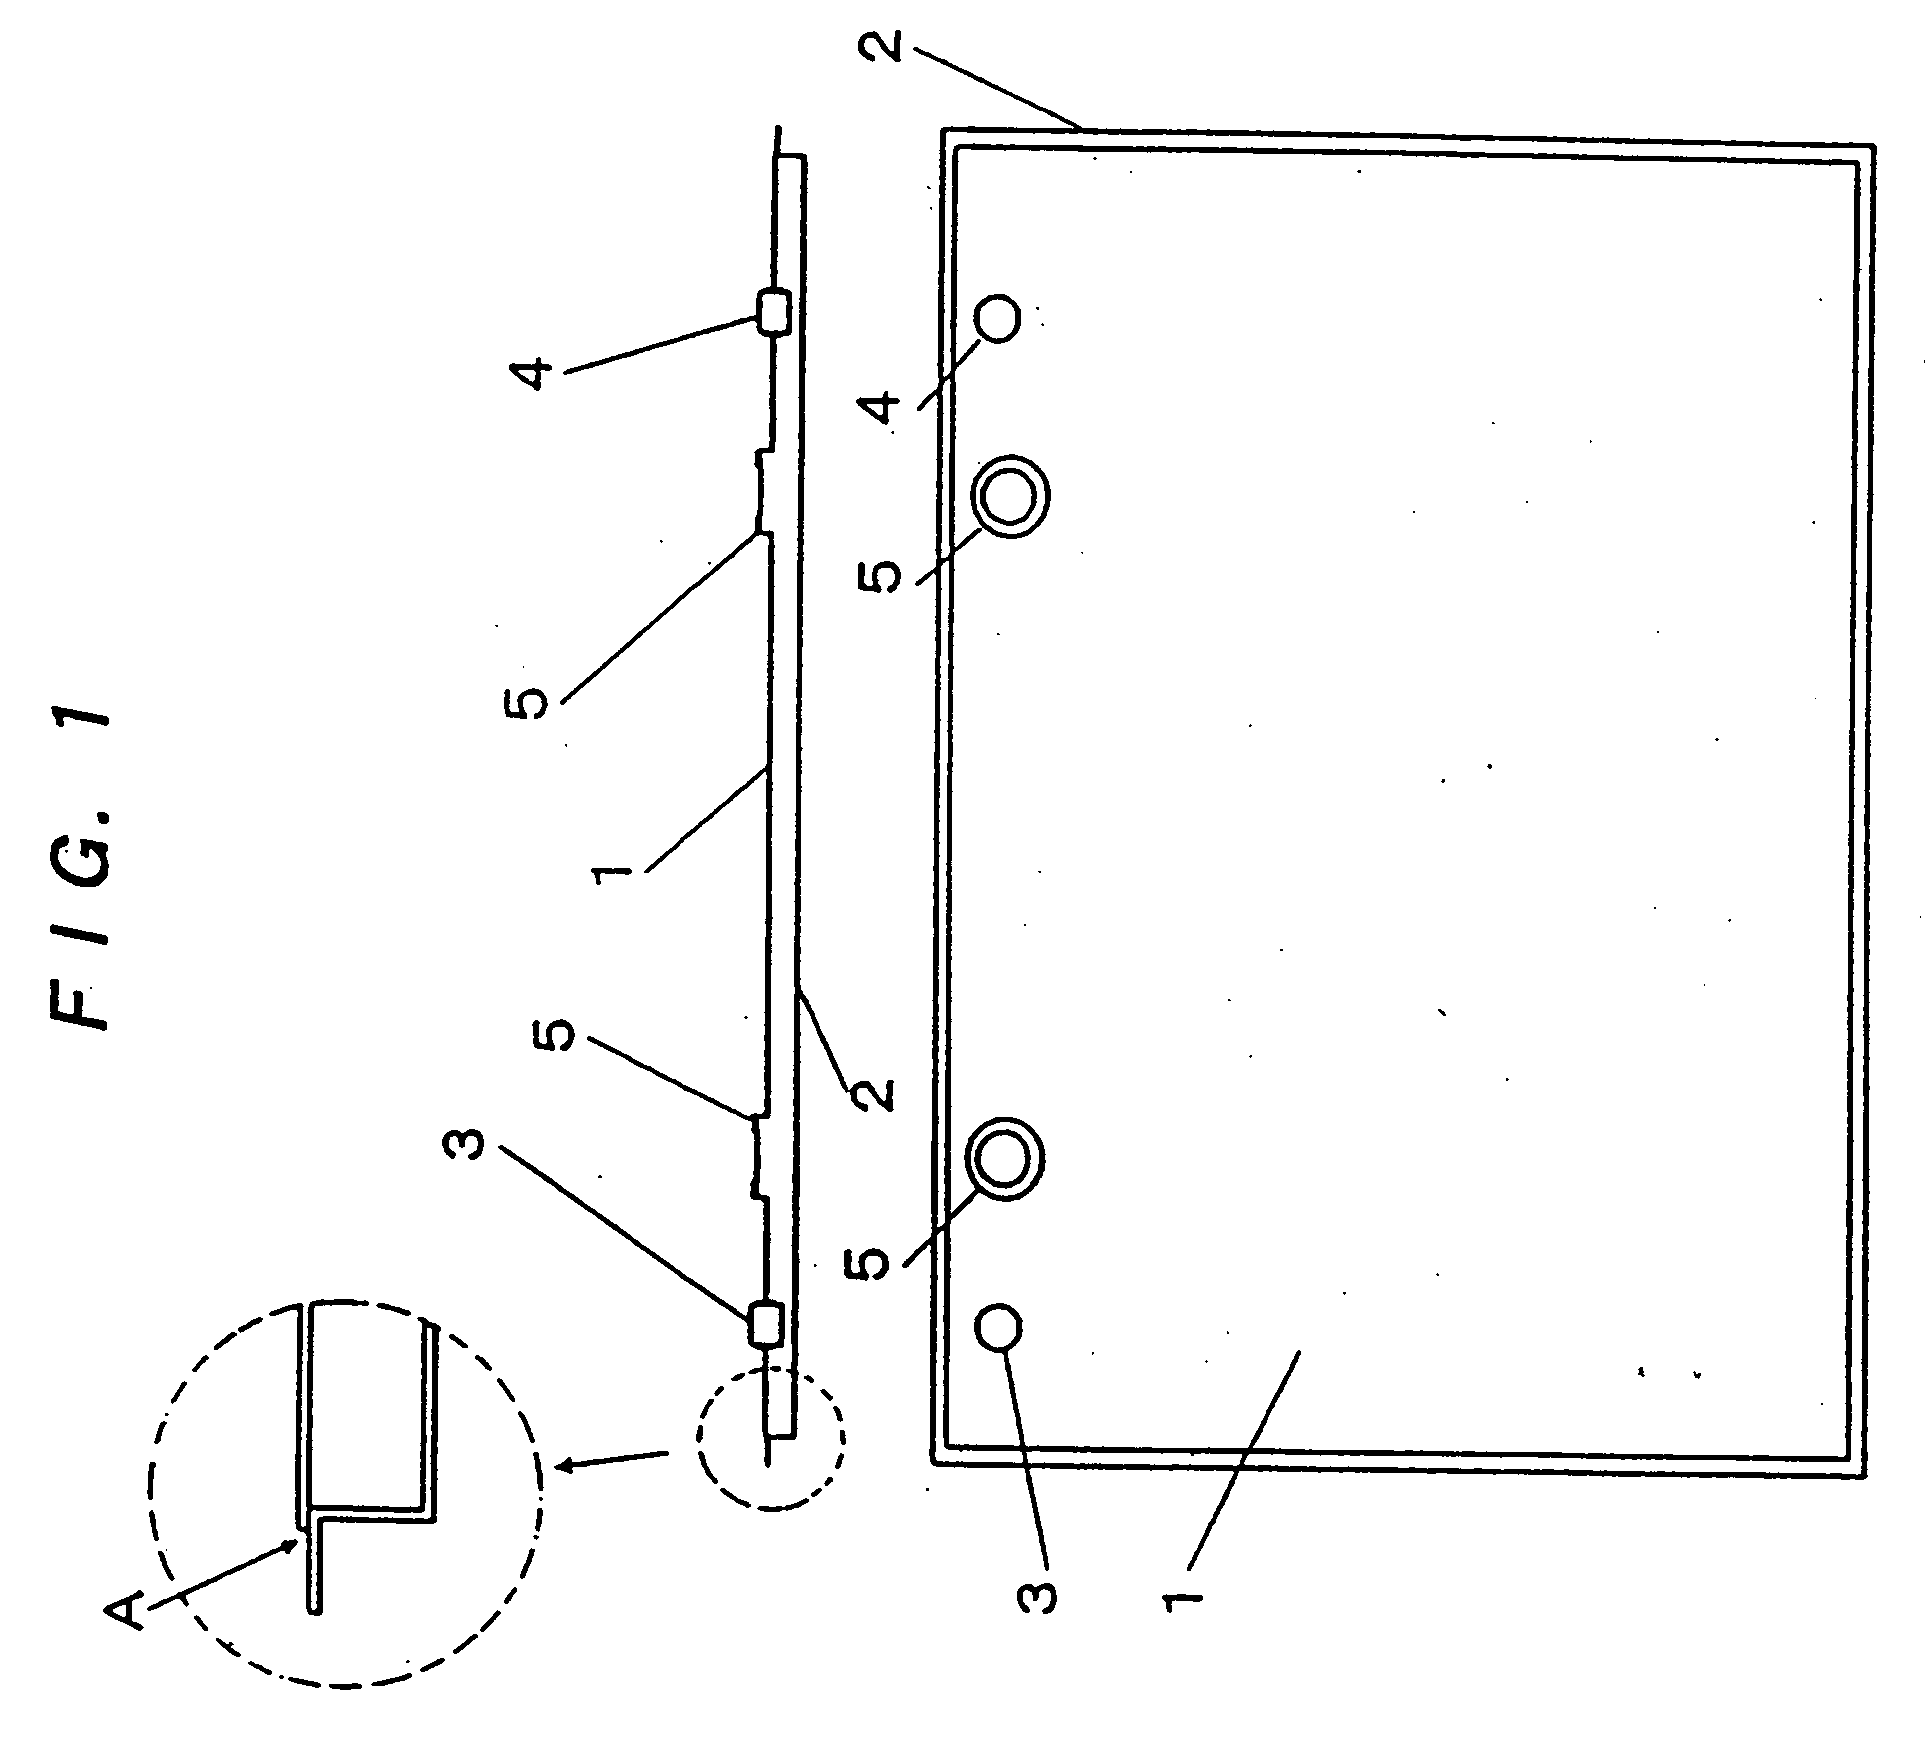 Non-aqueous secondary battery and its control method